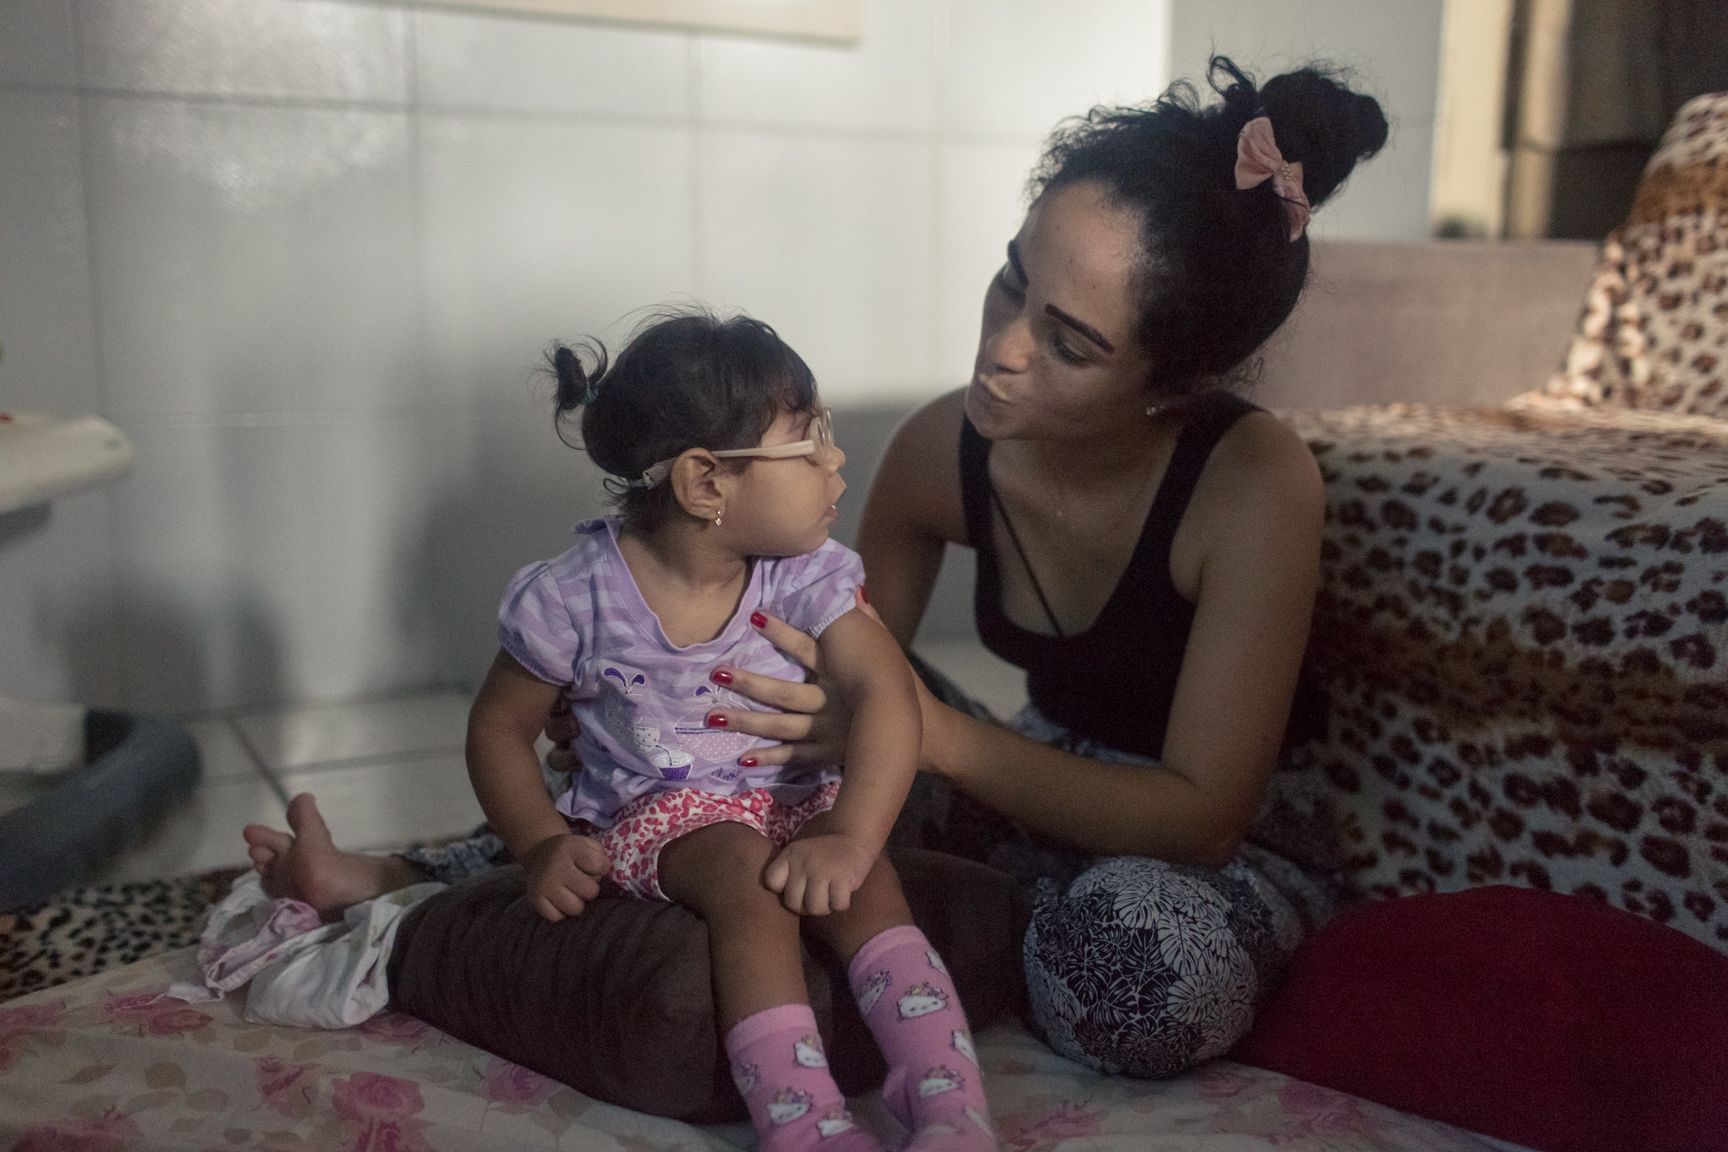 Mother and child: Dhulha Alen Silva do Nascimento and her daughter, Valentina, share a quiet moment at home. Image by Fábio Erdos. Brazil, 2017.